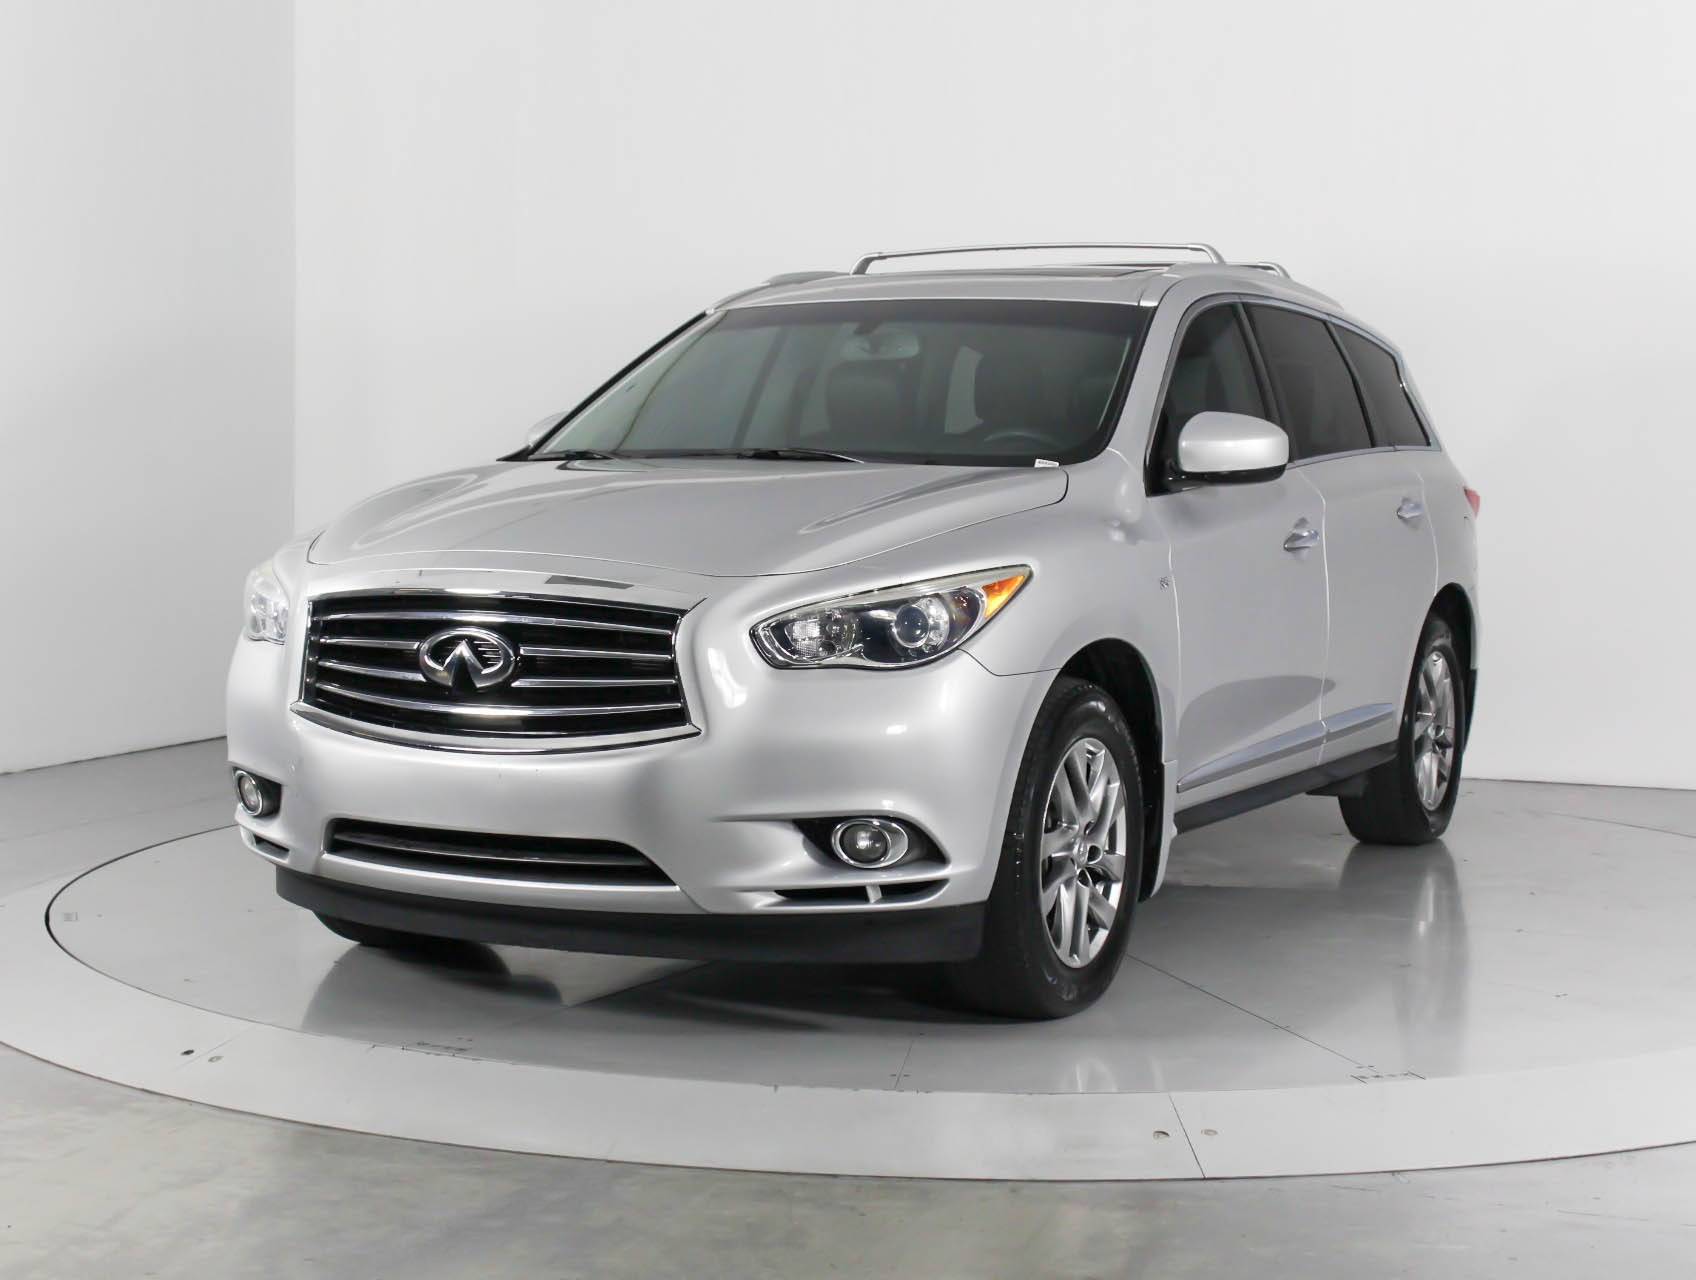 Used 2015 INFINITI QX60 Awd for sale in WEST PALM | 98262